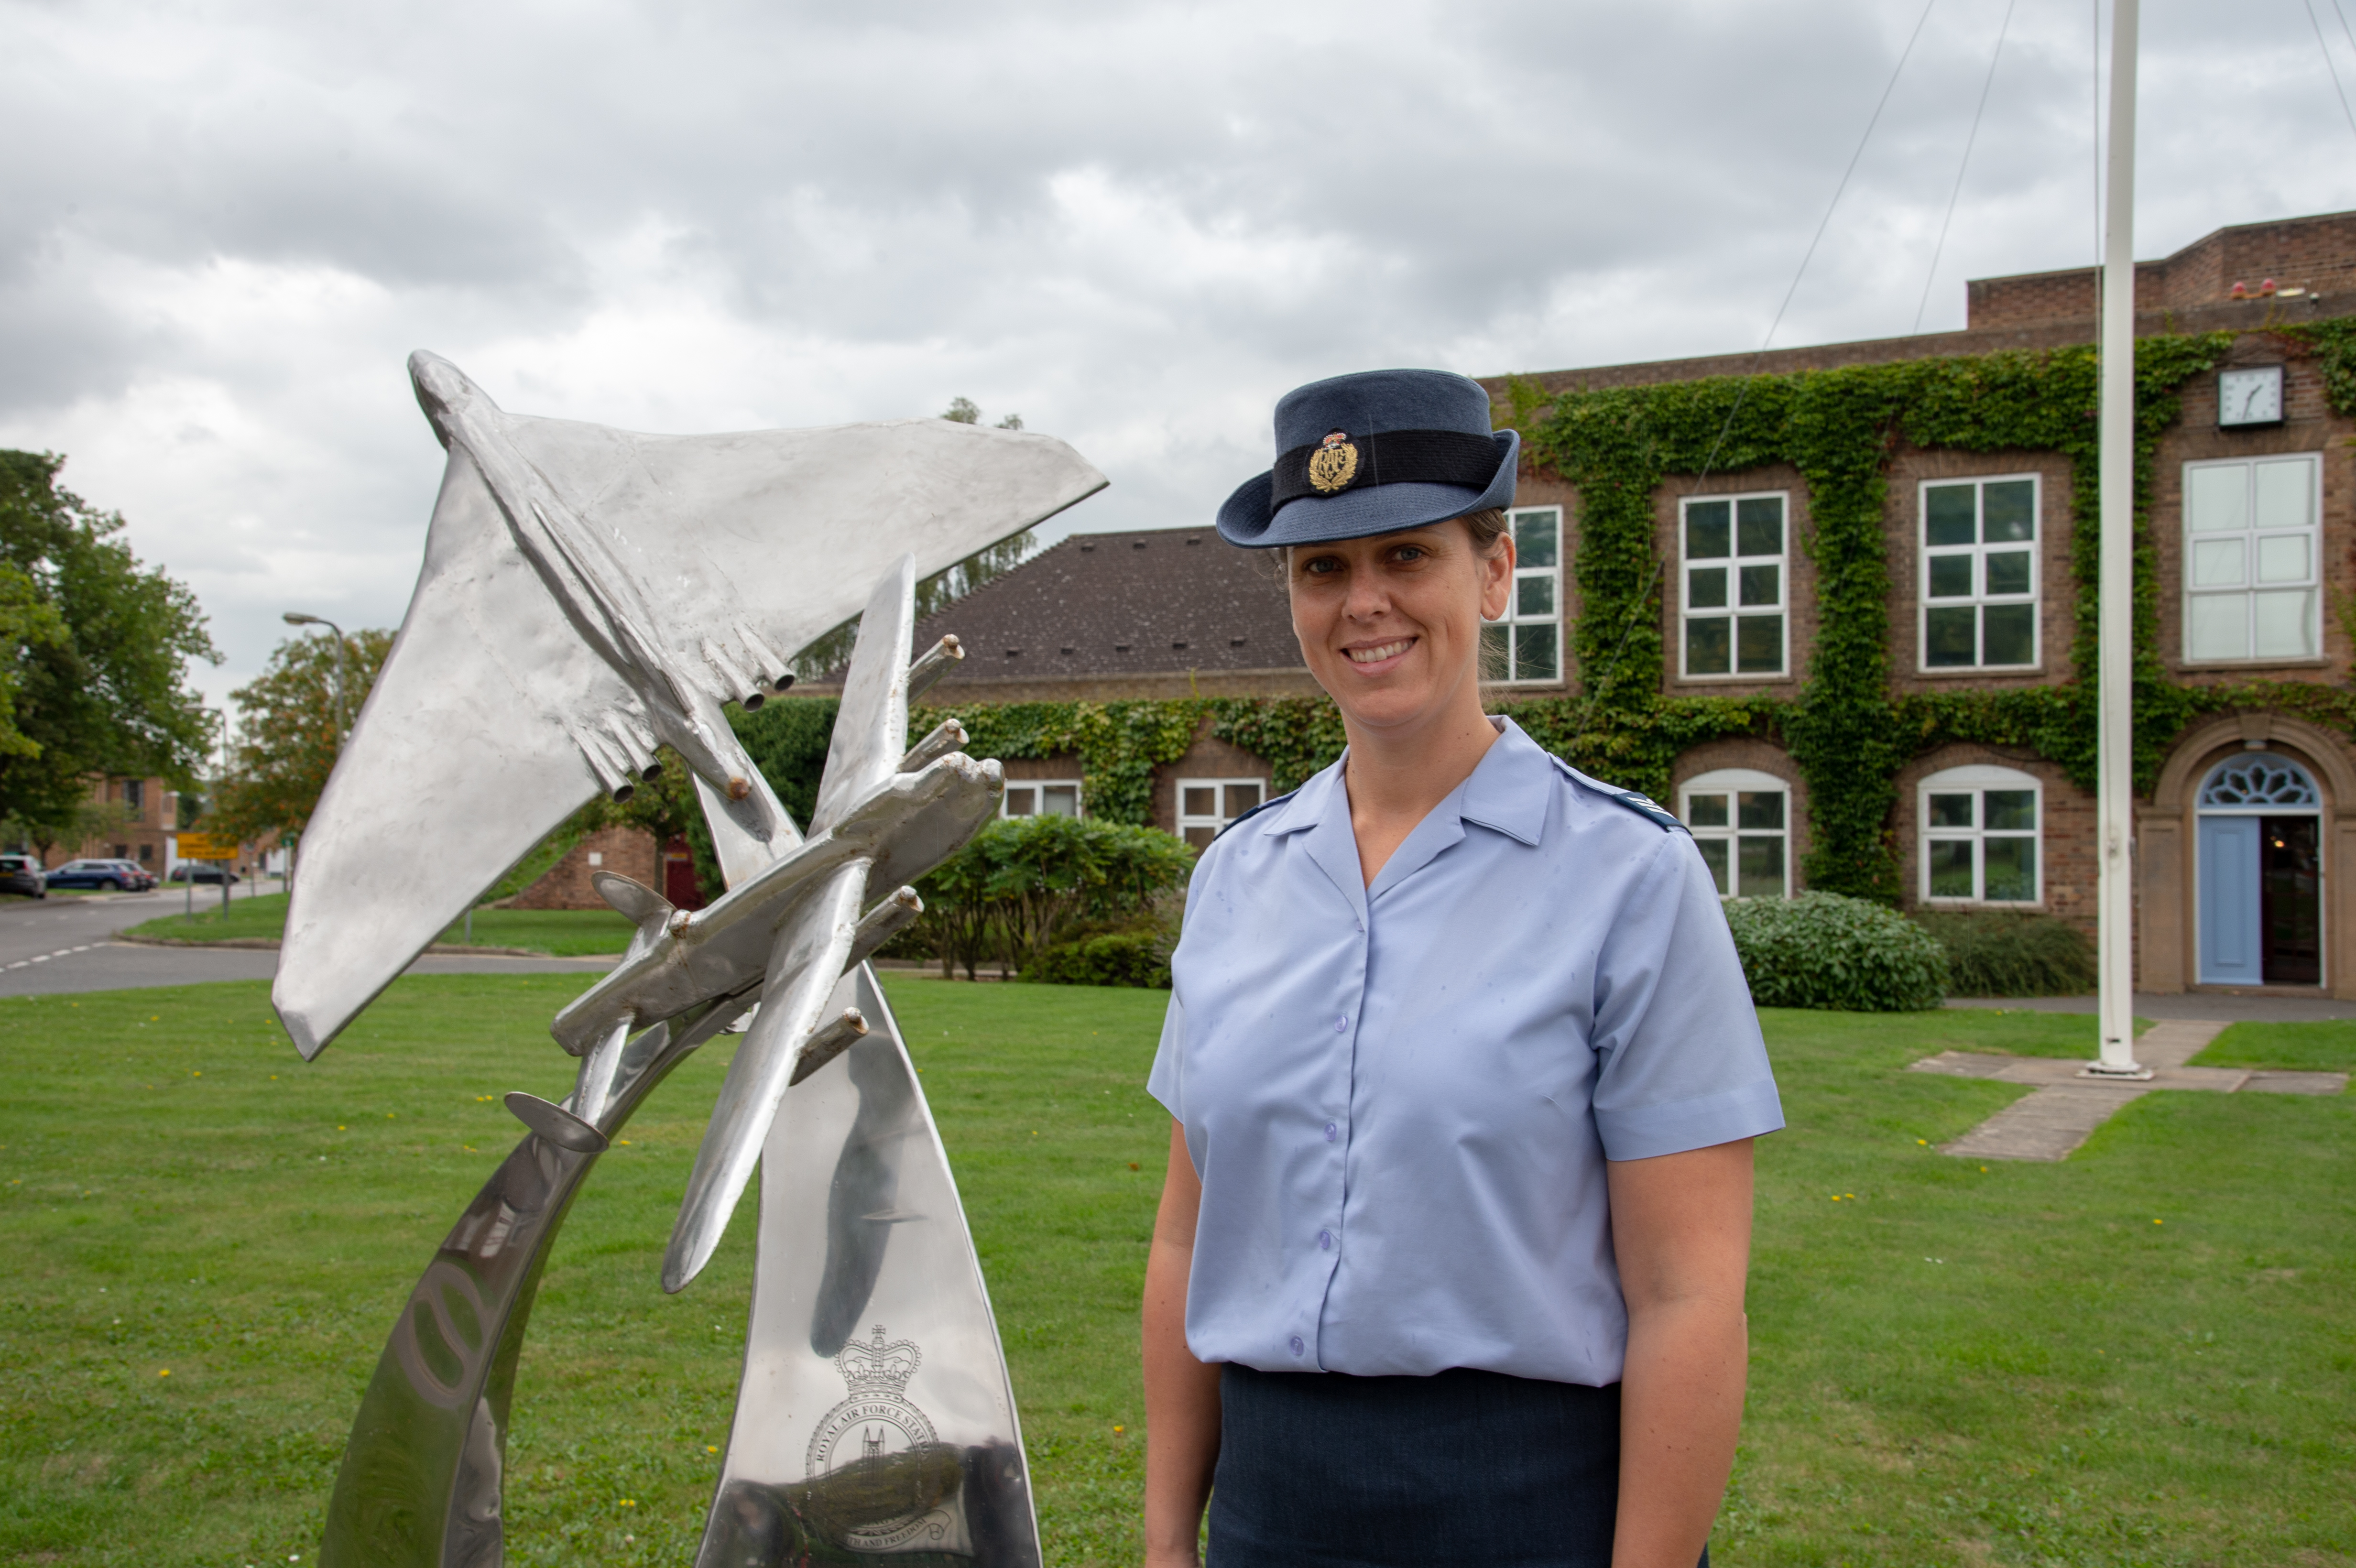 Image shows RAF Aviator standing on station by a metal aircraft statue.